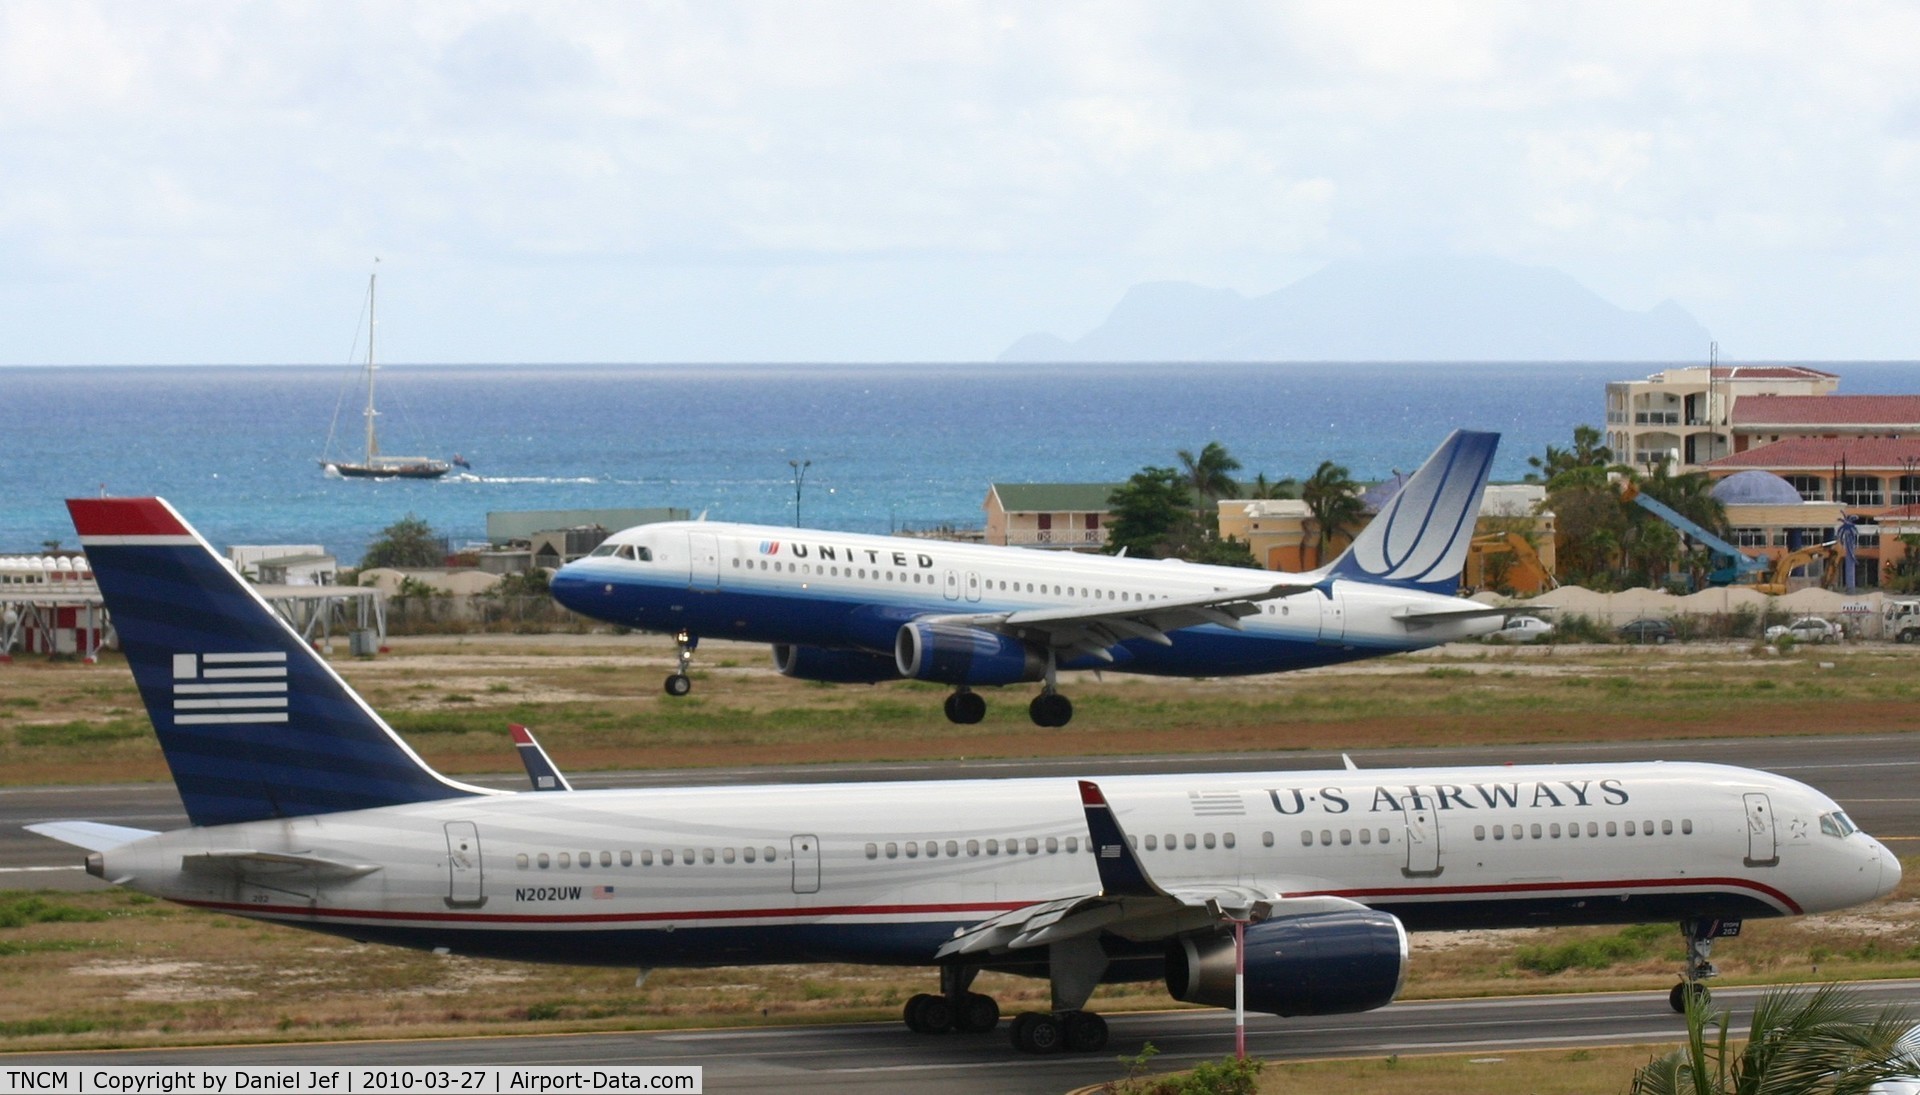 Princess Juliana International Airport, Philipsburg, Sint Maarten Netherlands Antilles (TNCM) - US and UNITED AIR doing ther thing at TNCM